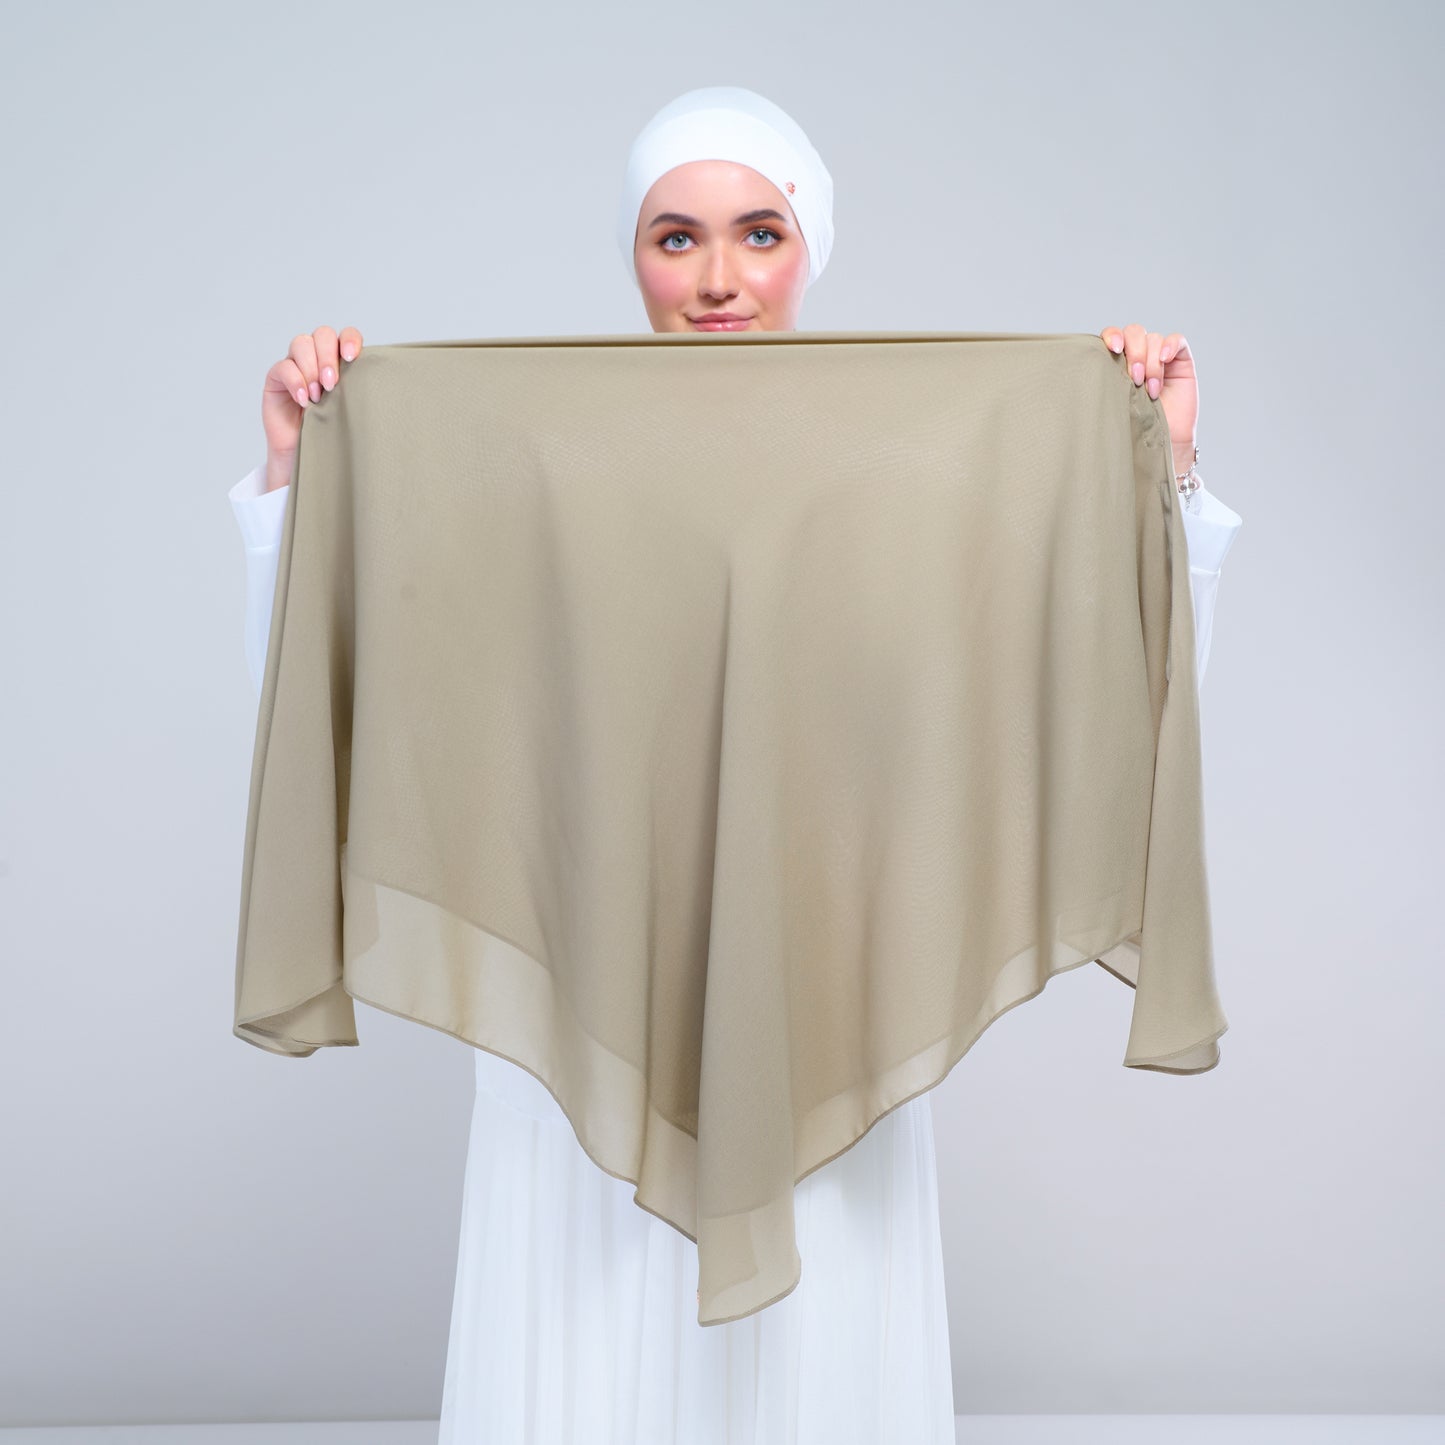 Instant Square Tag & Go l Cotton Voile in Matcha Taupe